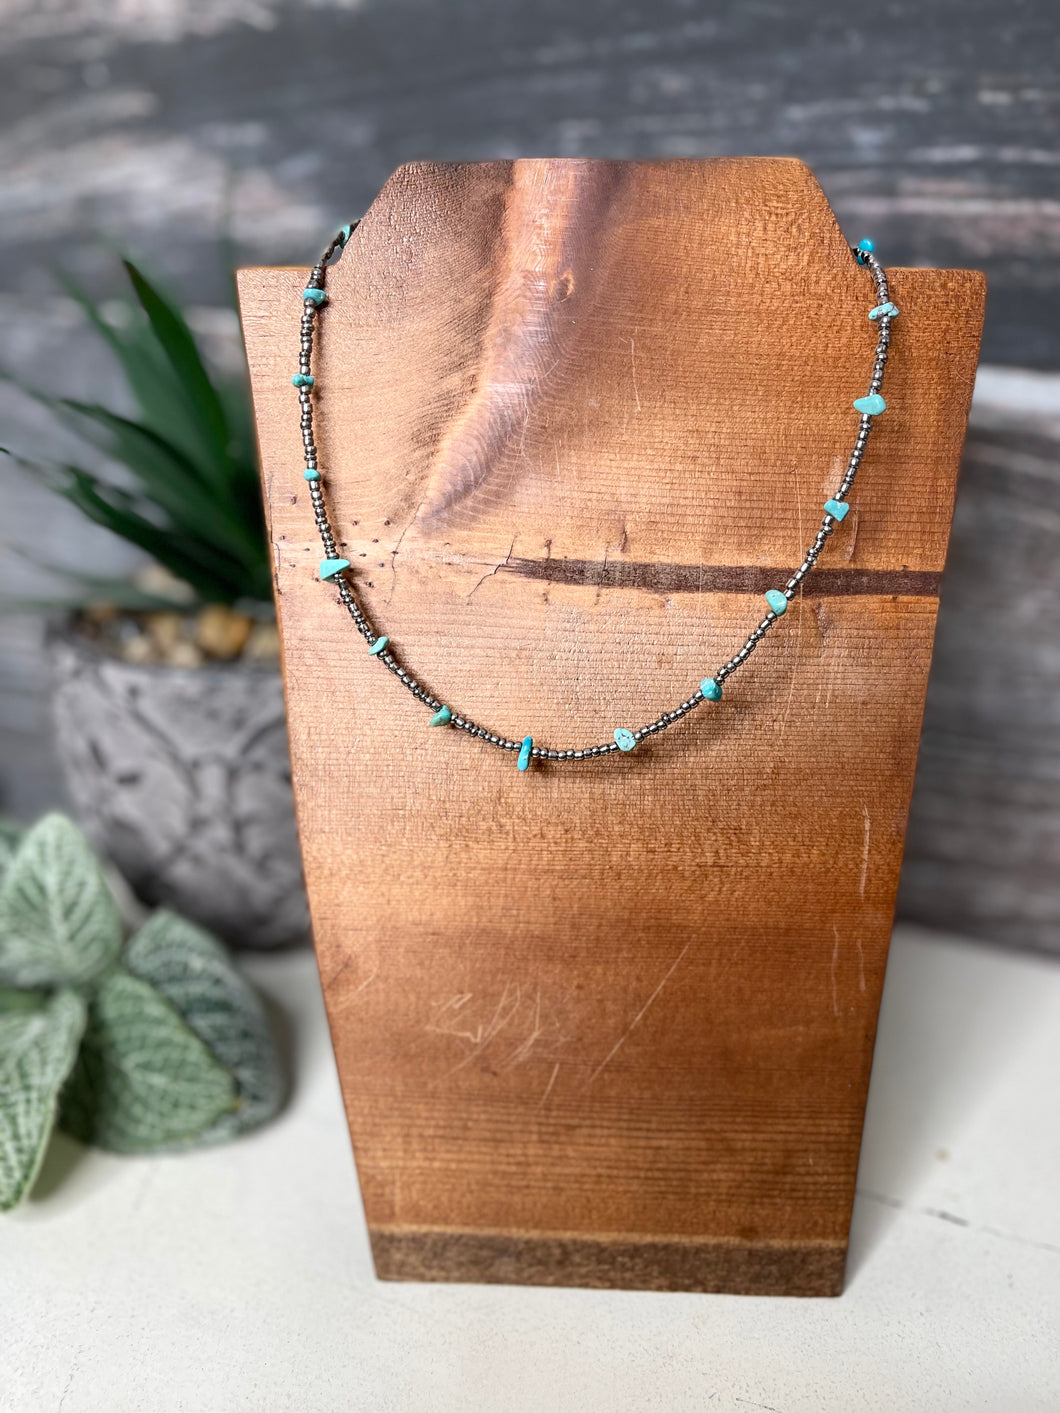 Prairie South - Seed Beed and Turquoise Choker